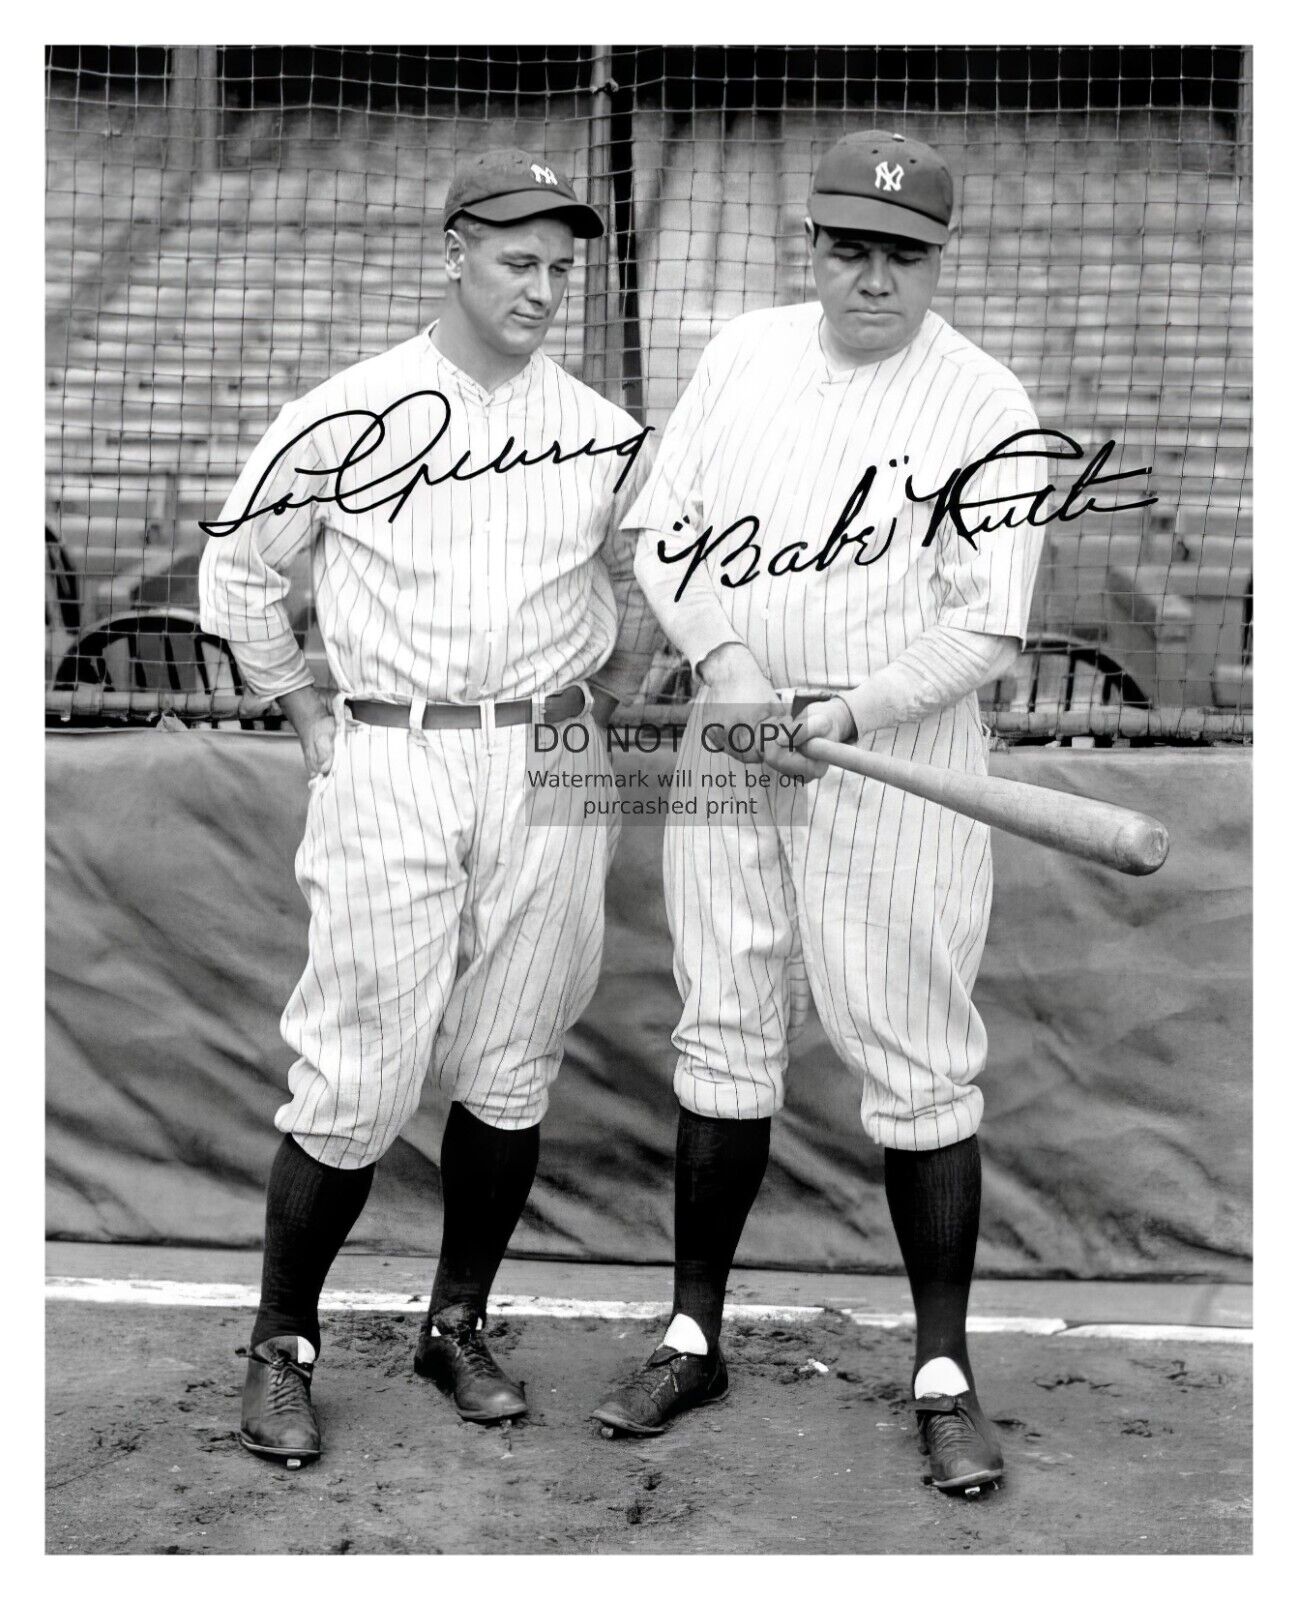 BABE RUTH & LOU GEHRIG AUTOGRAPHED NEW YORK YANKESS PLAYERS 8X10 PHOTO REPRINT